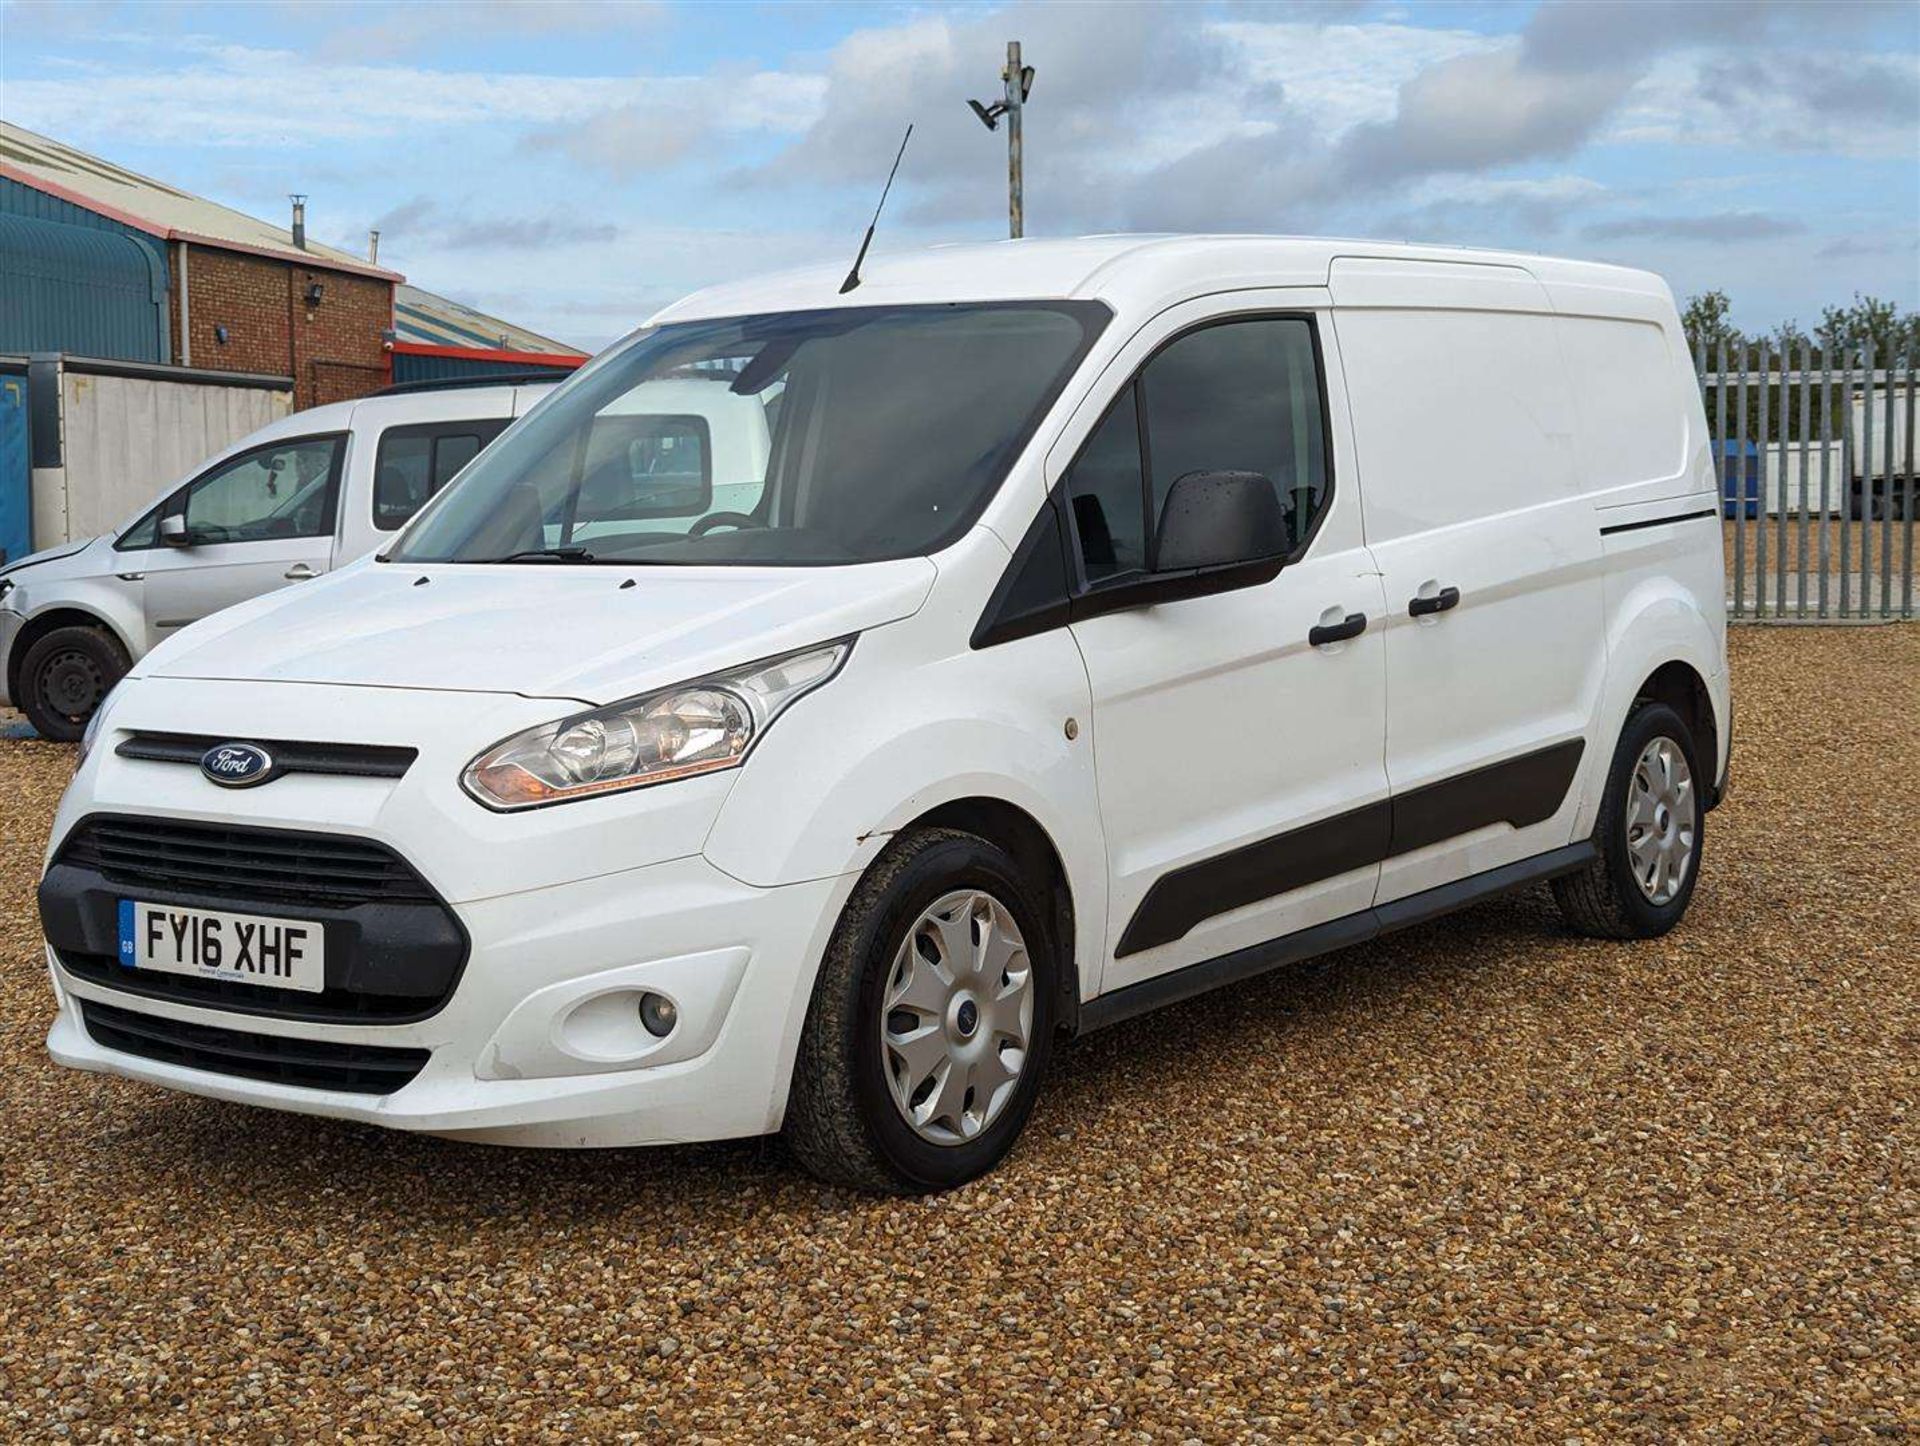 2016 FORD TRANSIT CONNECT 210 TREND